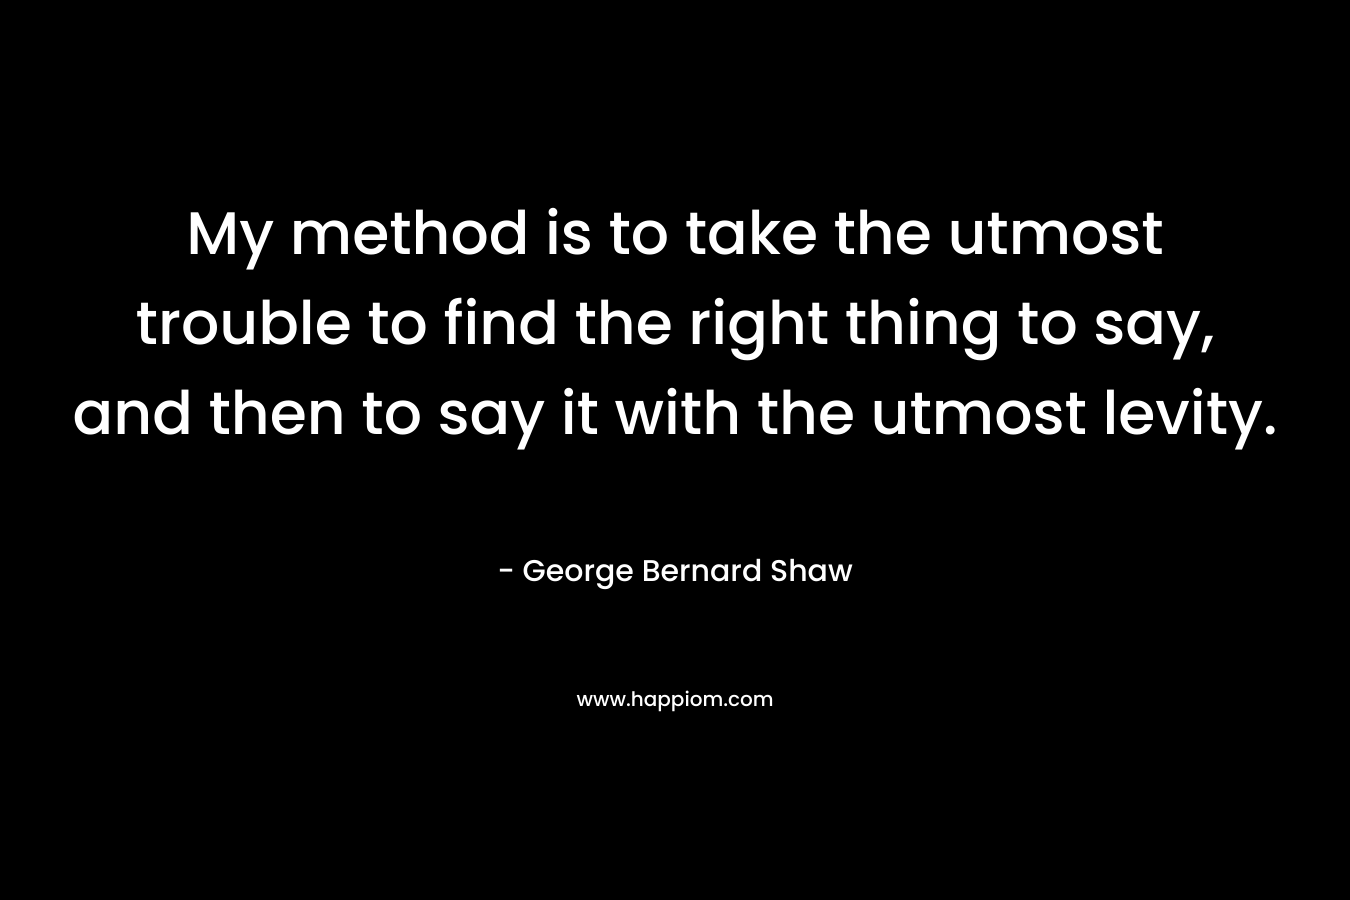 My method is to take the utmost trouble to find the right thing to say, and then to say it with the utmost levity. – George Bernard Shaw